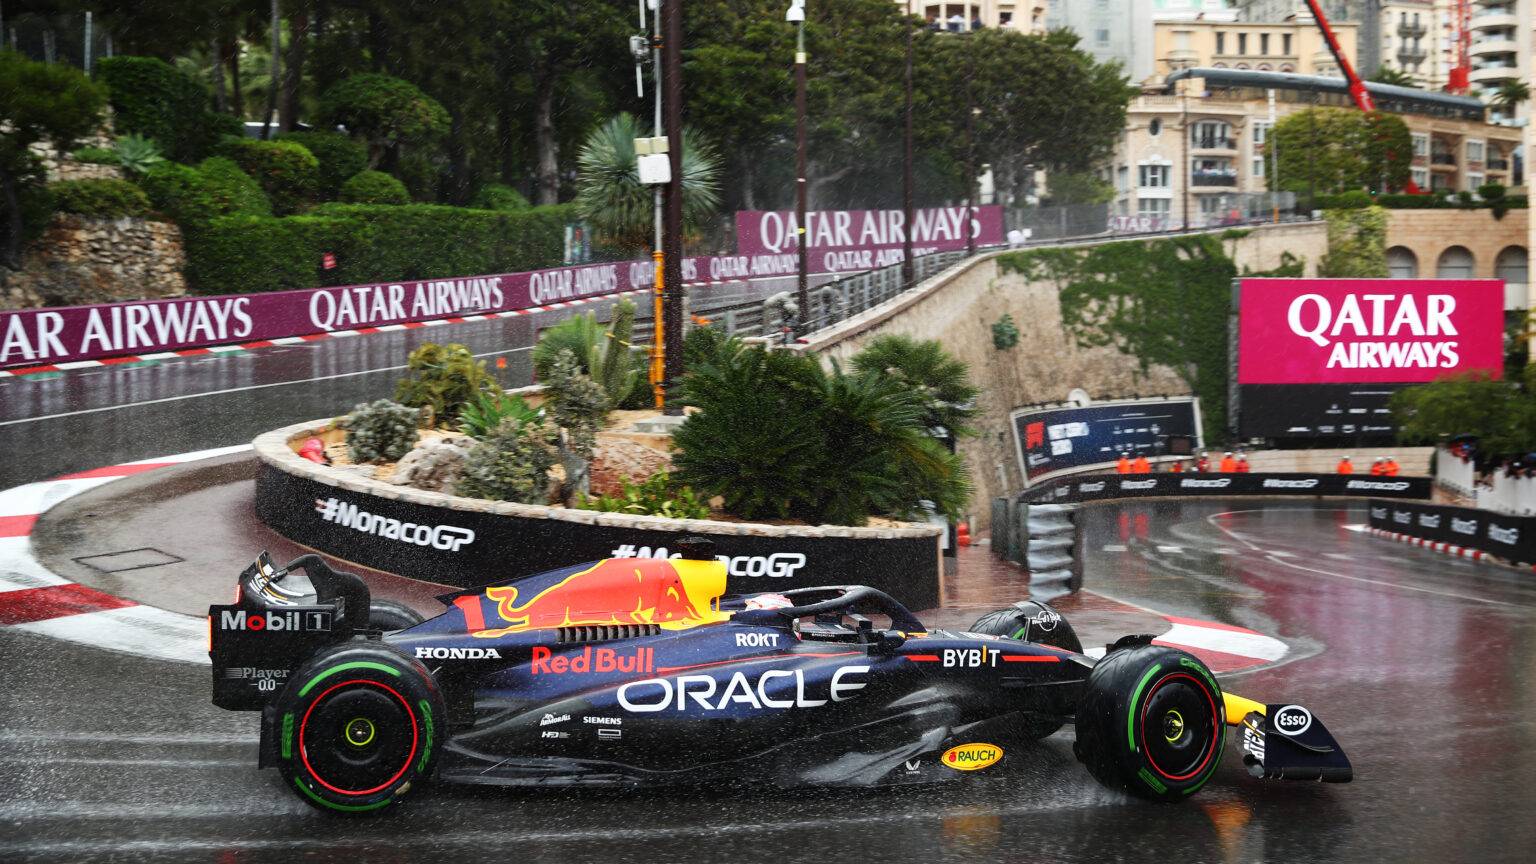 Monaco Grand Prix delivers drama but Max Verstappen is still streets ahead after avoiding slip-up